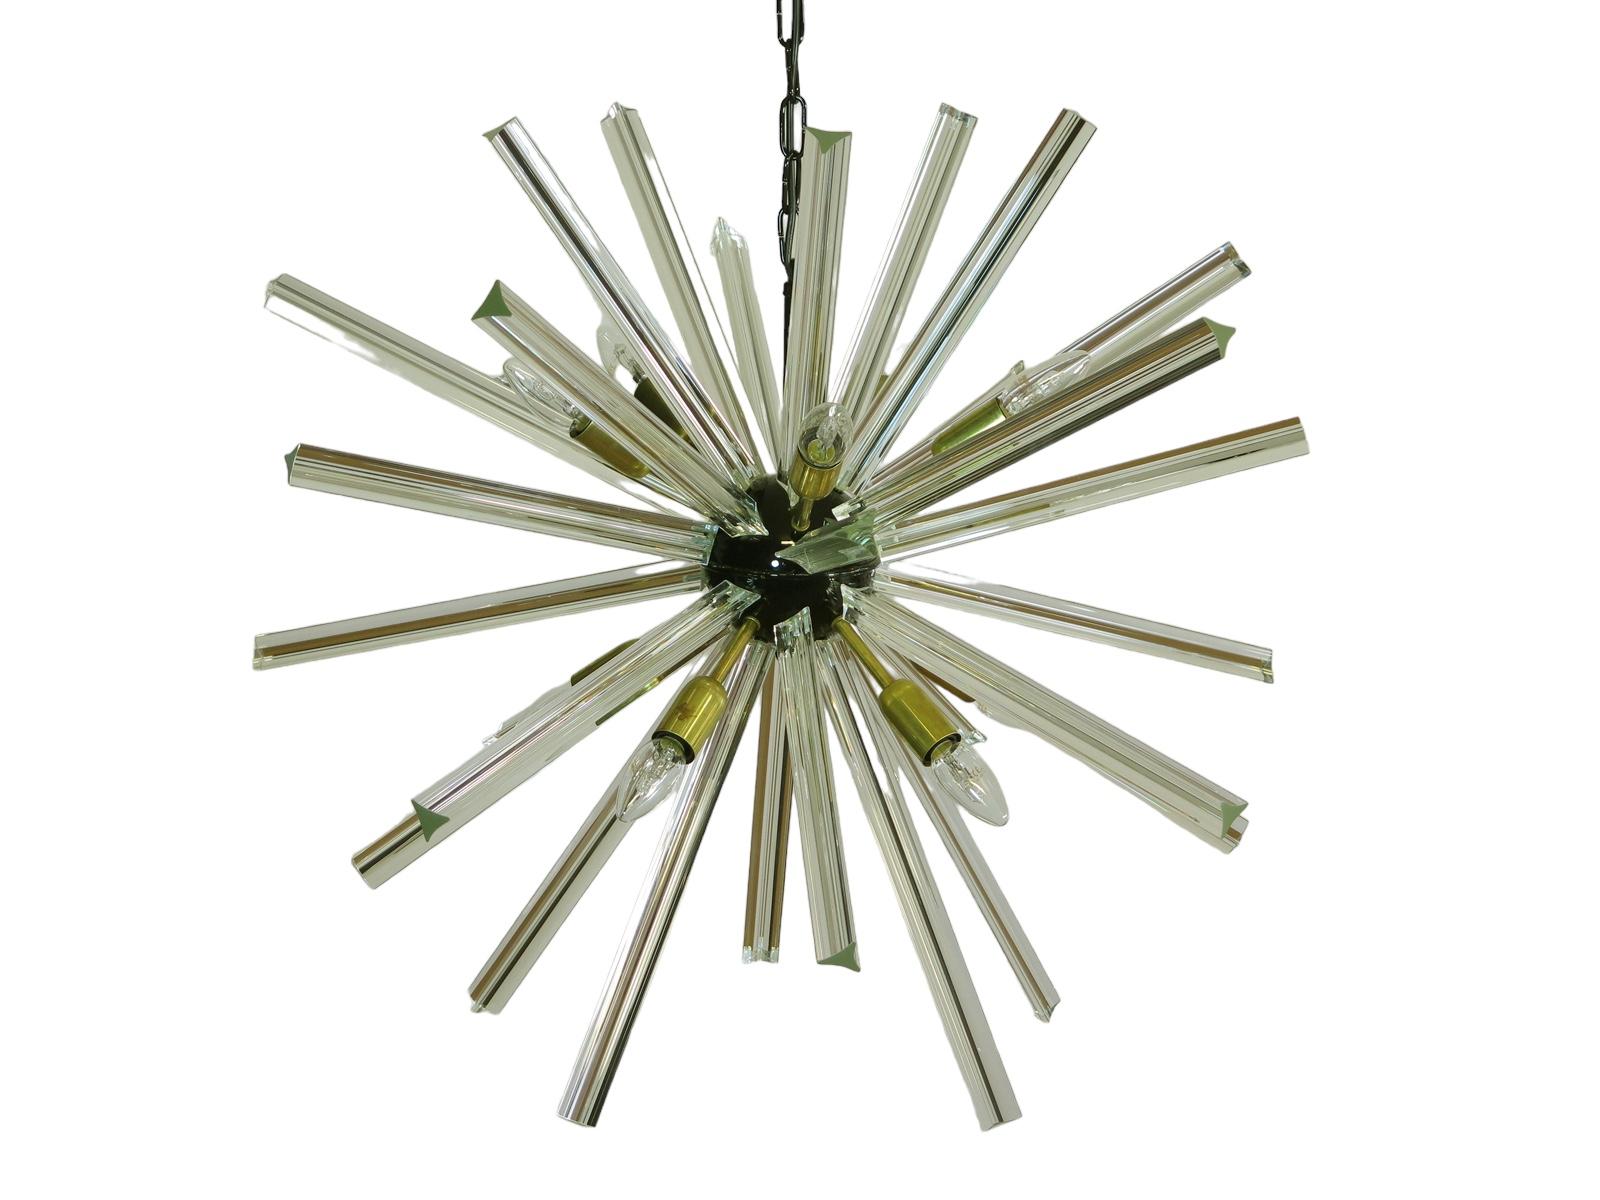 Sputnik chandelier surrounding 30 crystal glass 'triedri' prisms radiating from a center black metal nucleus. Brass lamp holder.
Period: late xx century
Dimensions: 47,25 inches (120 cm) height with chain; 29,50 inches (75 cm) diameter.
Dimension